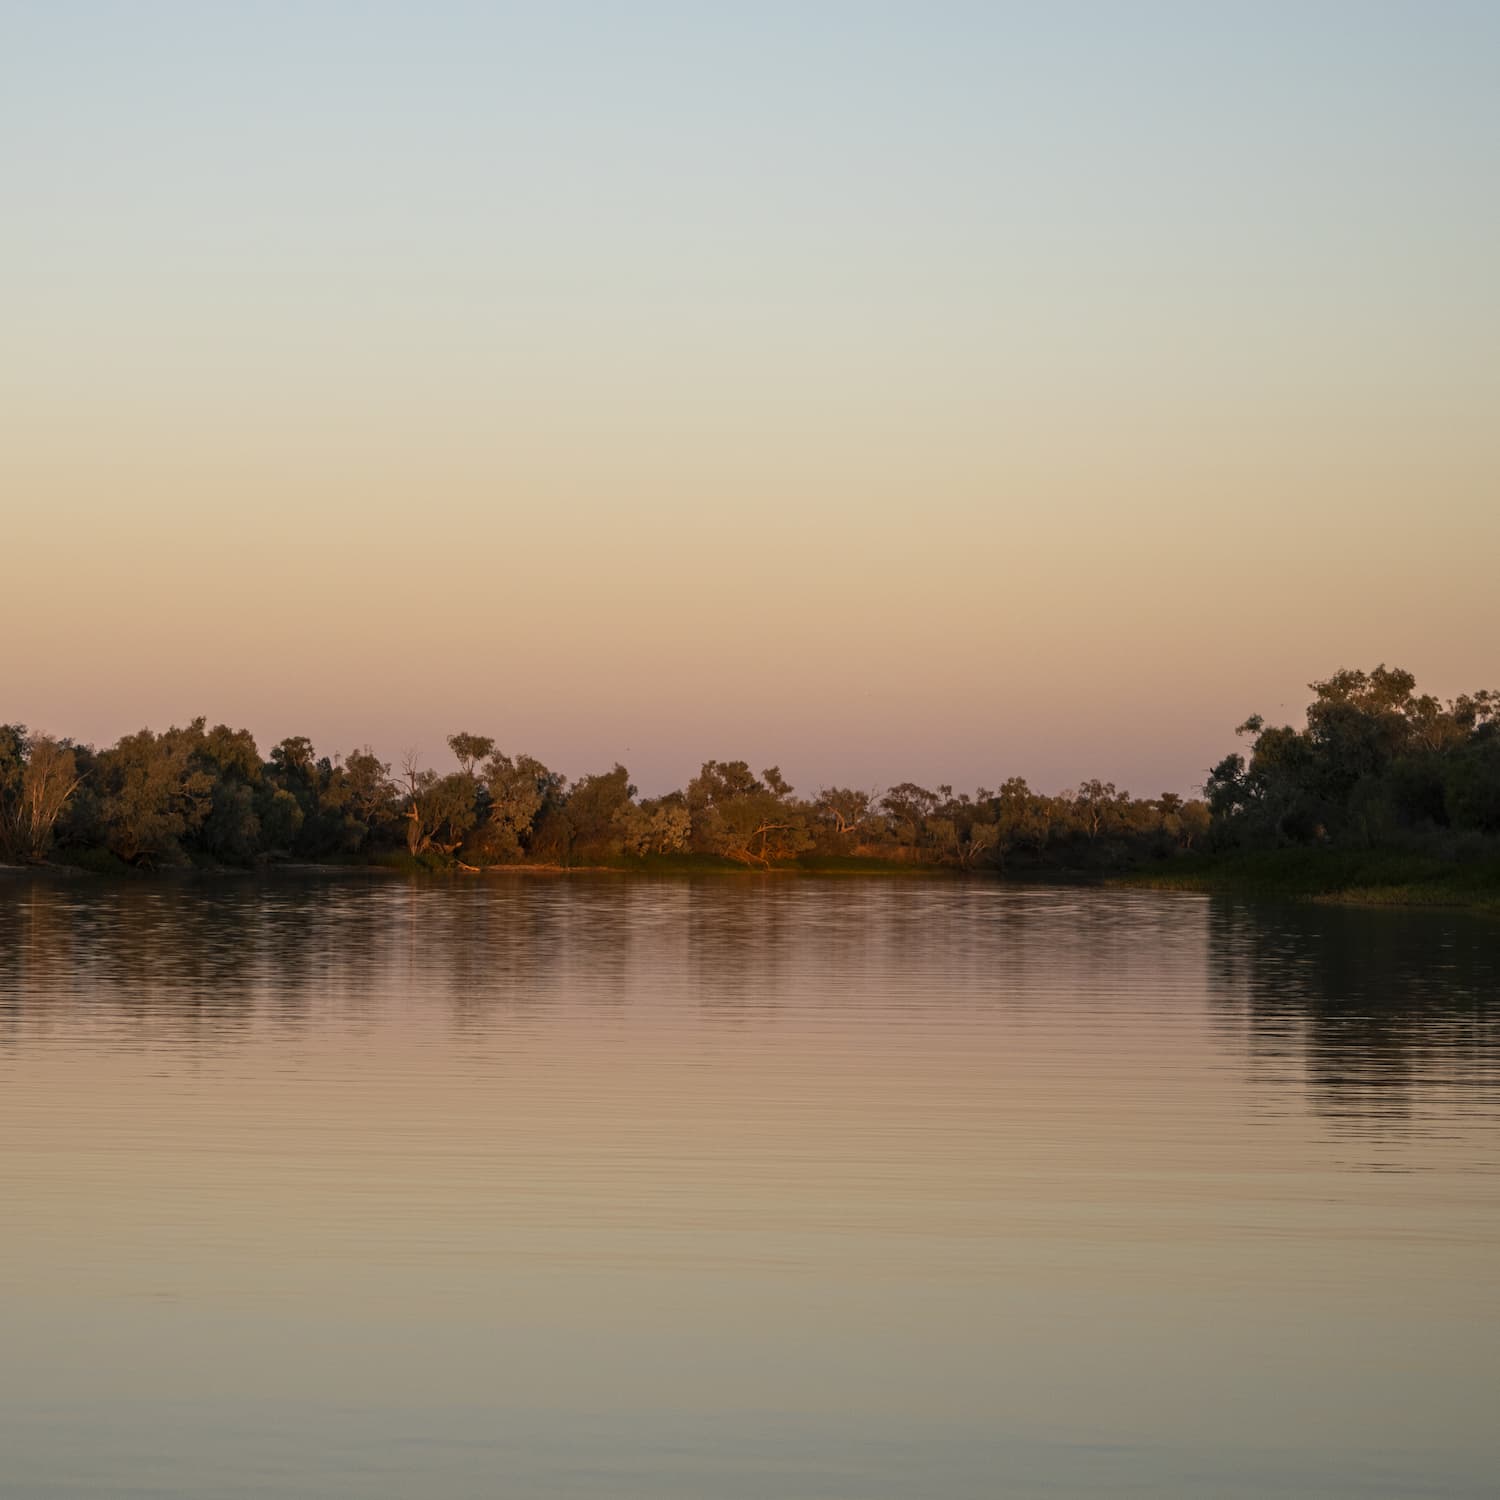 The serenity of the Thomson River at sunset